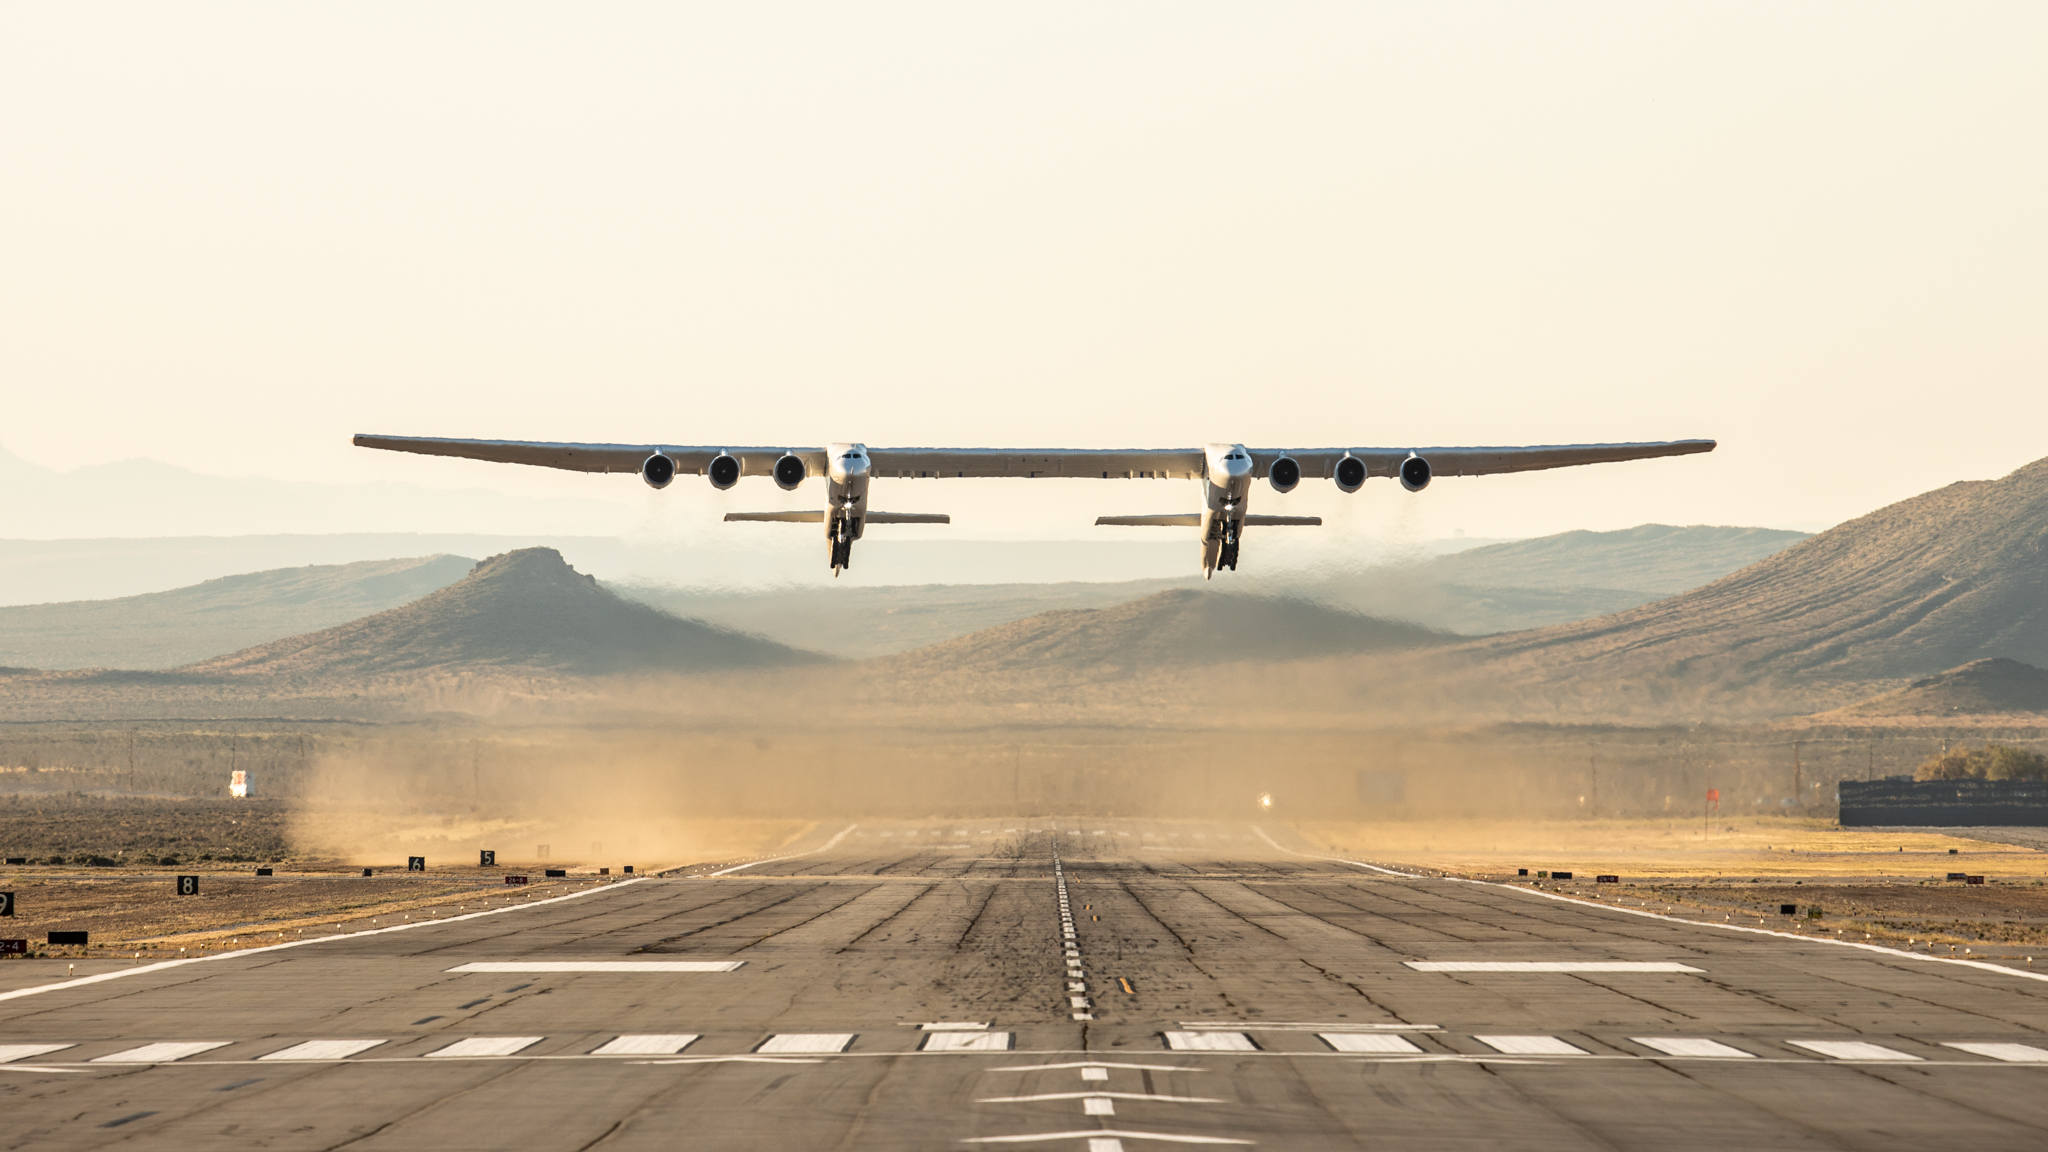 The world’s biggest plane has 6 engines and a 385-foot wingspan